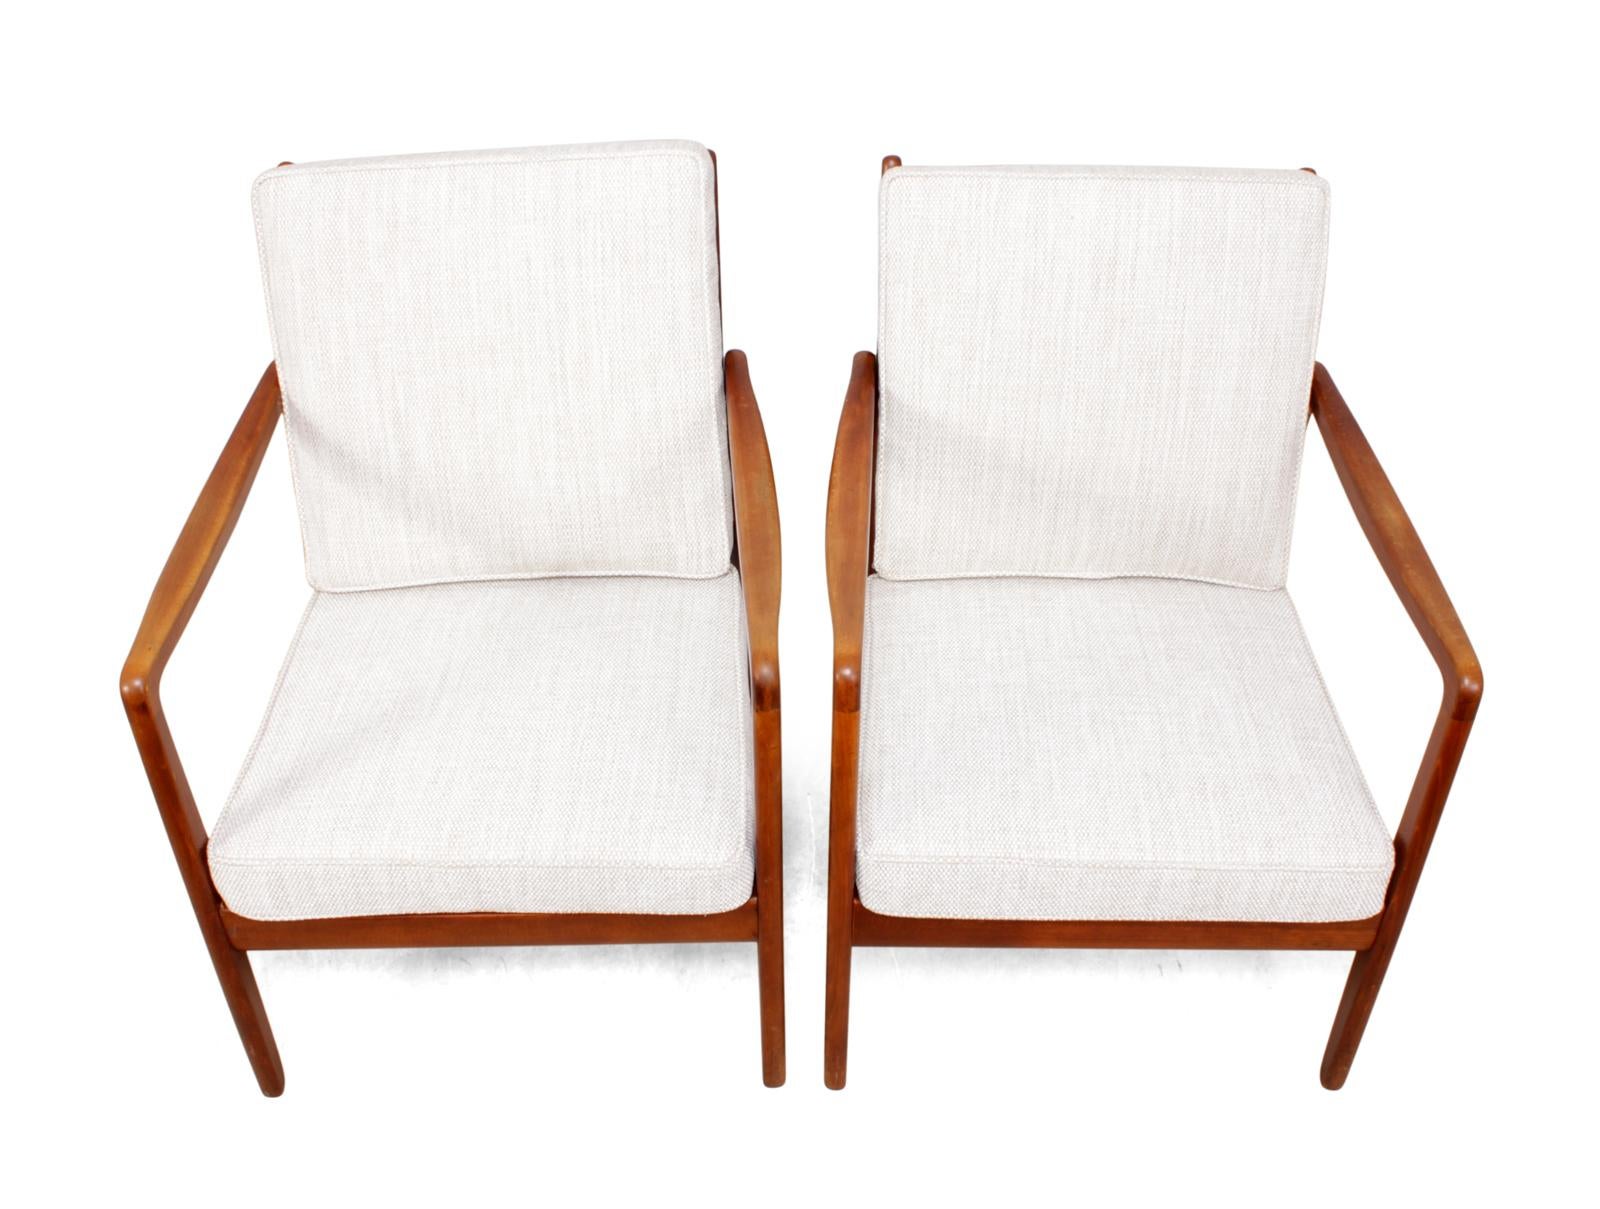 Mid-20th Century Pair of Armchairs by Ole Wancher for France and Son, circa 1950